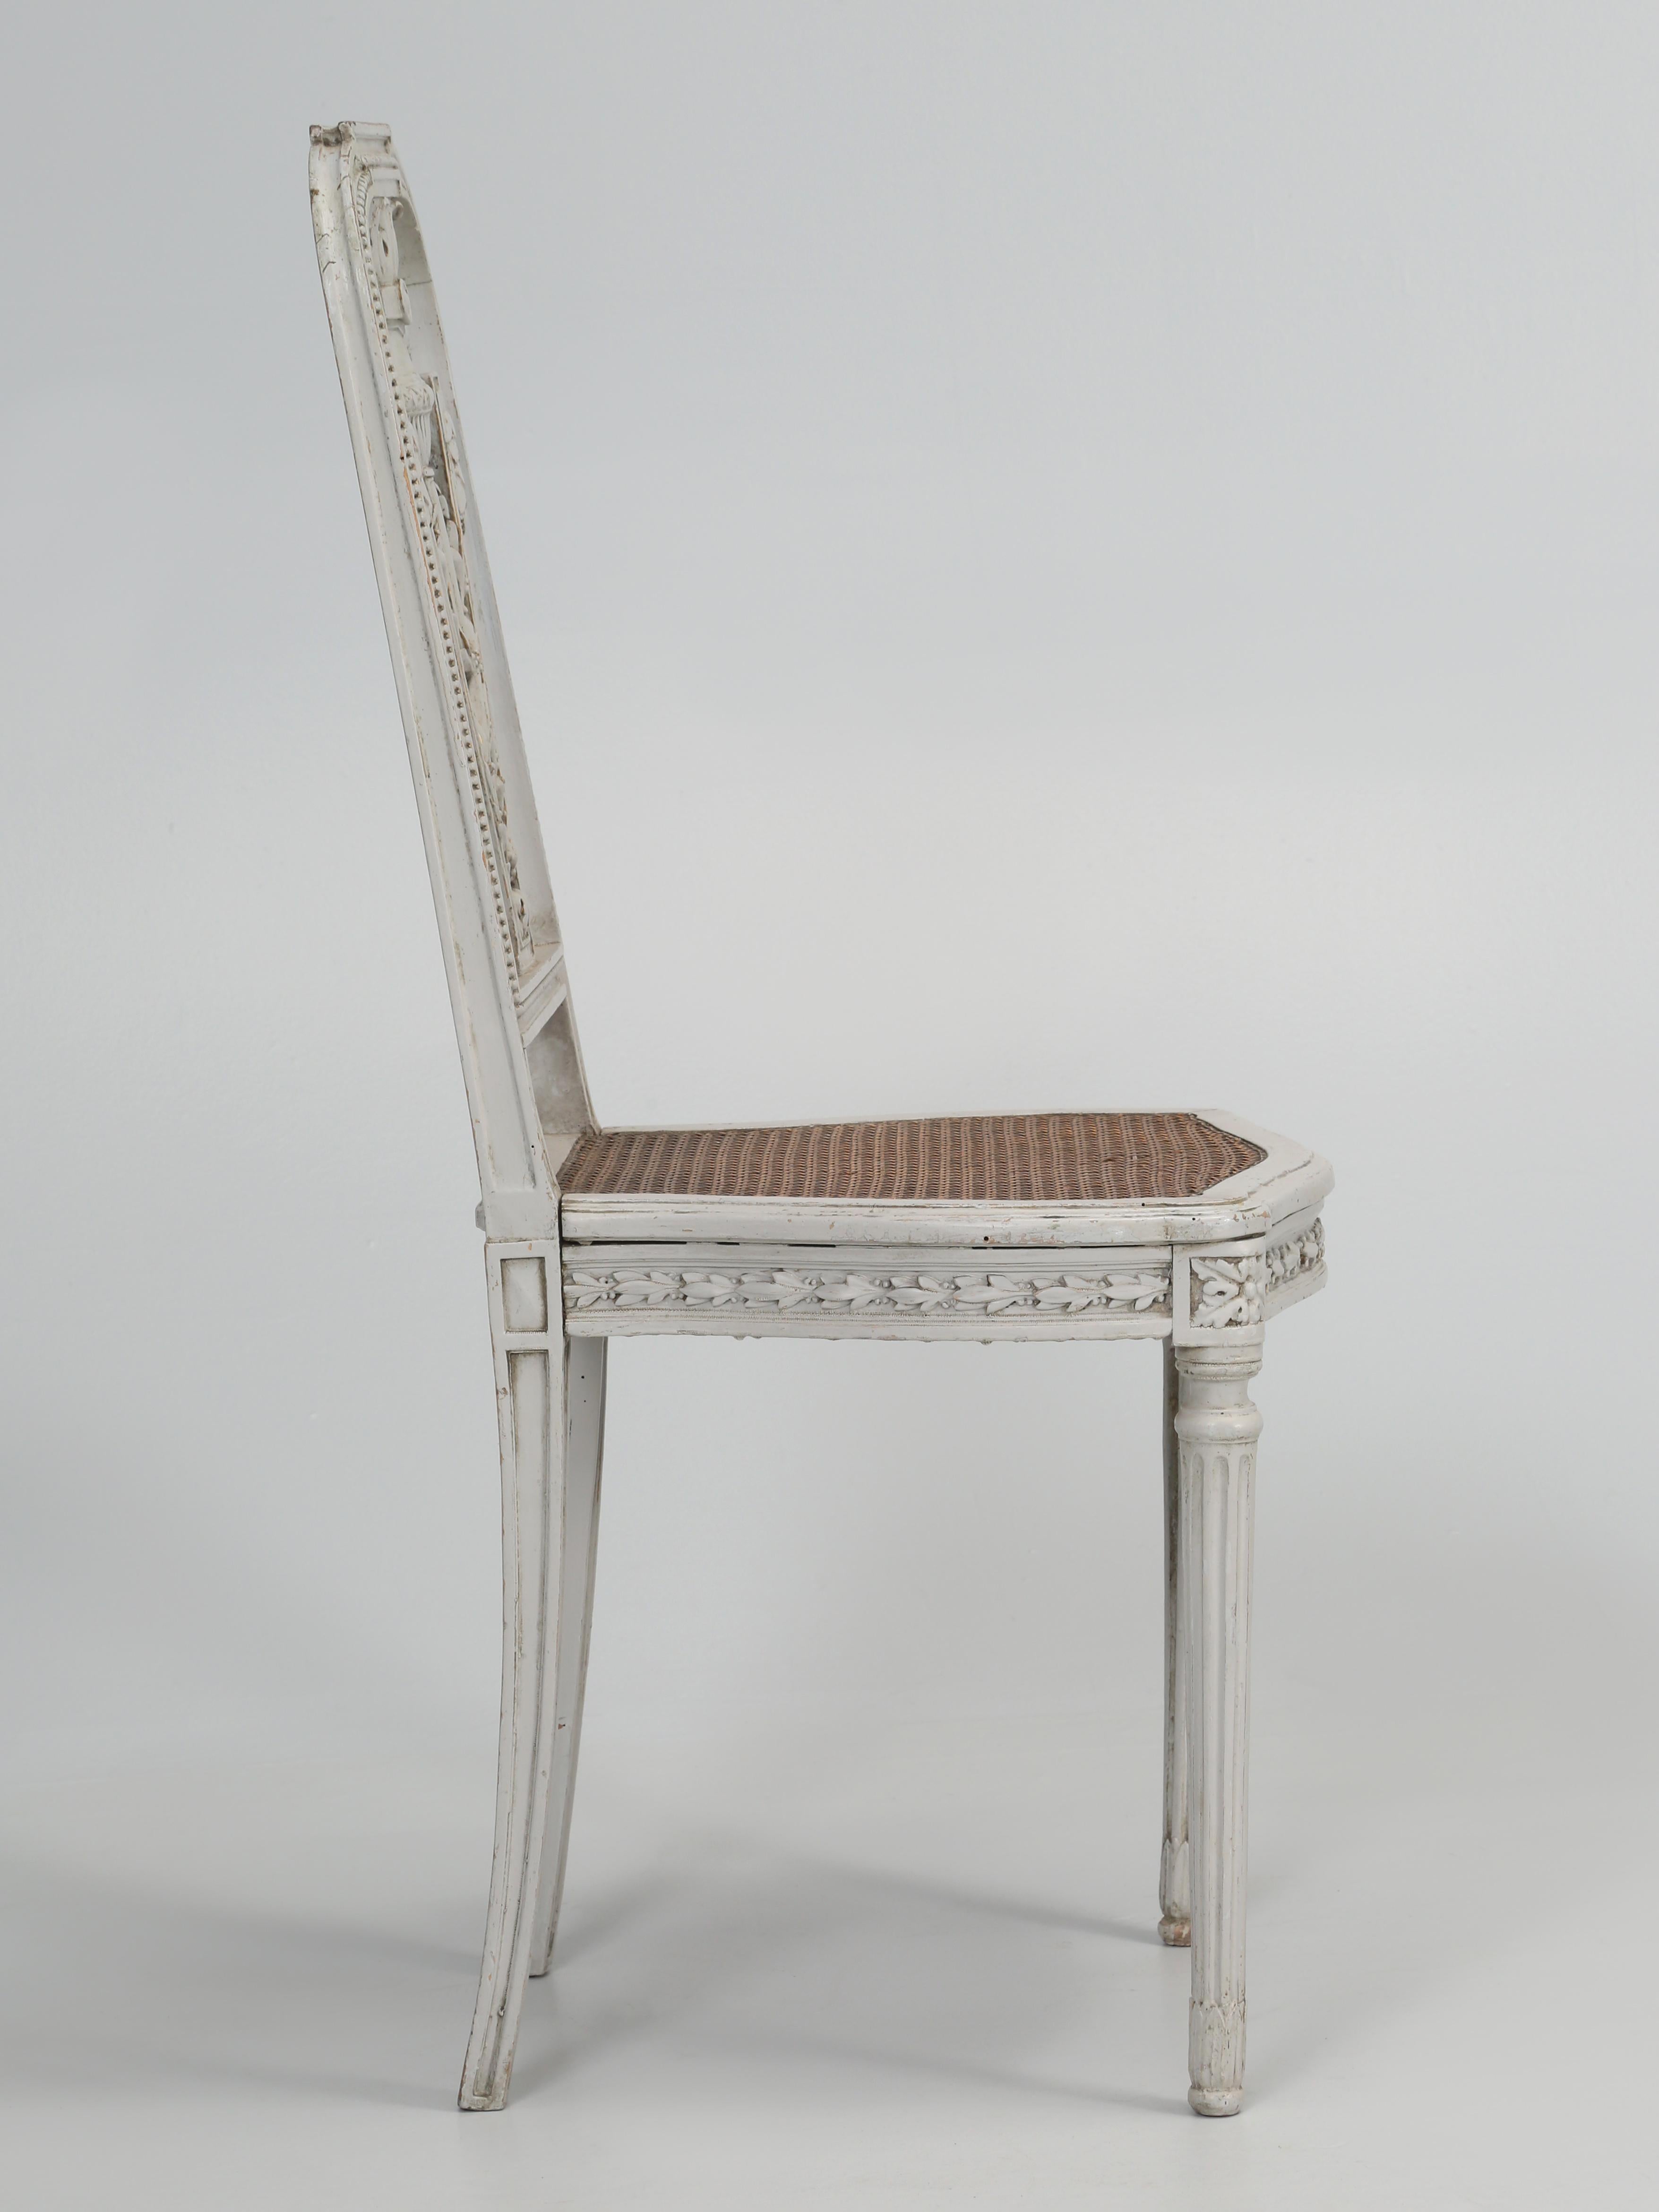 French ladies dressing table Louis XVI style chair, or simply a small occasional side chair in old paint, with the original cane seat.